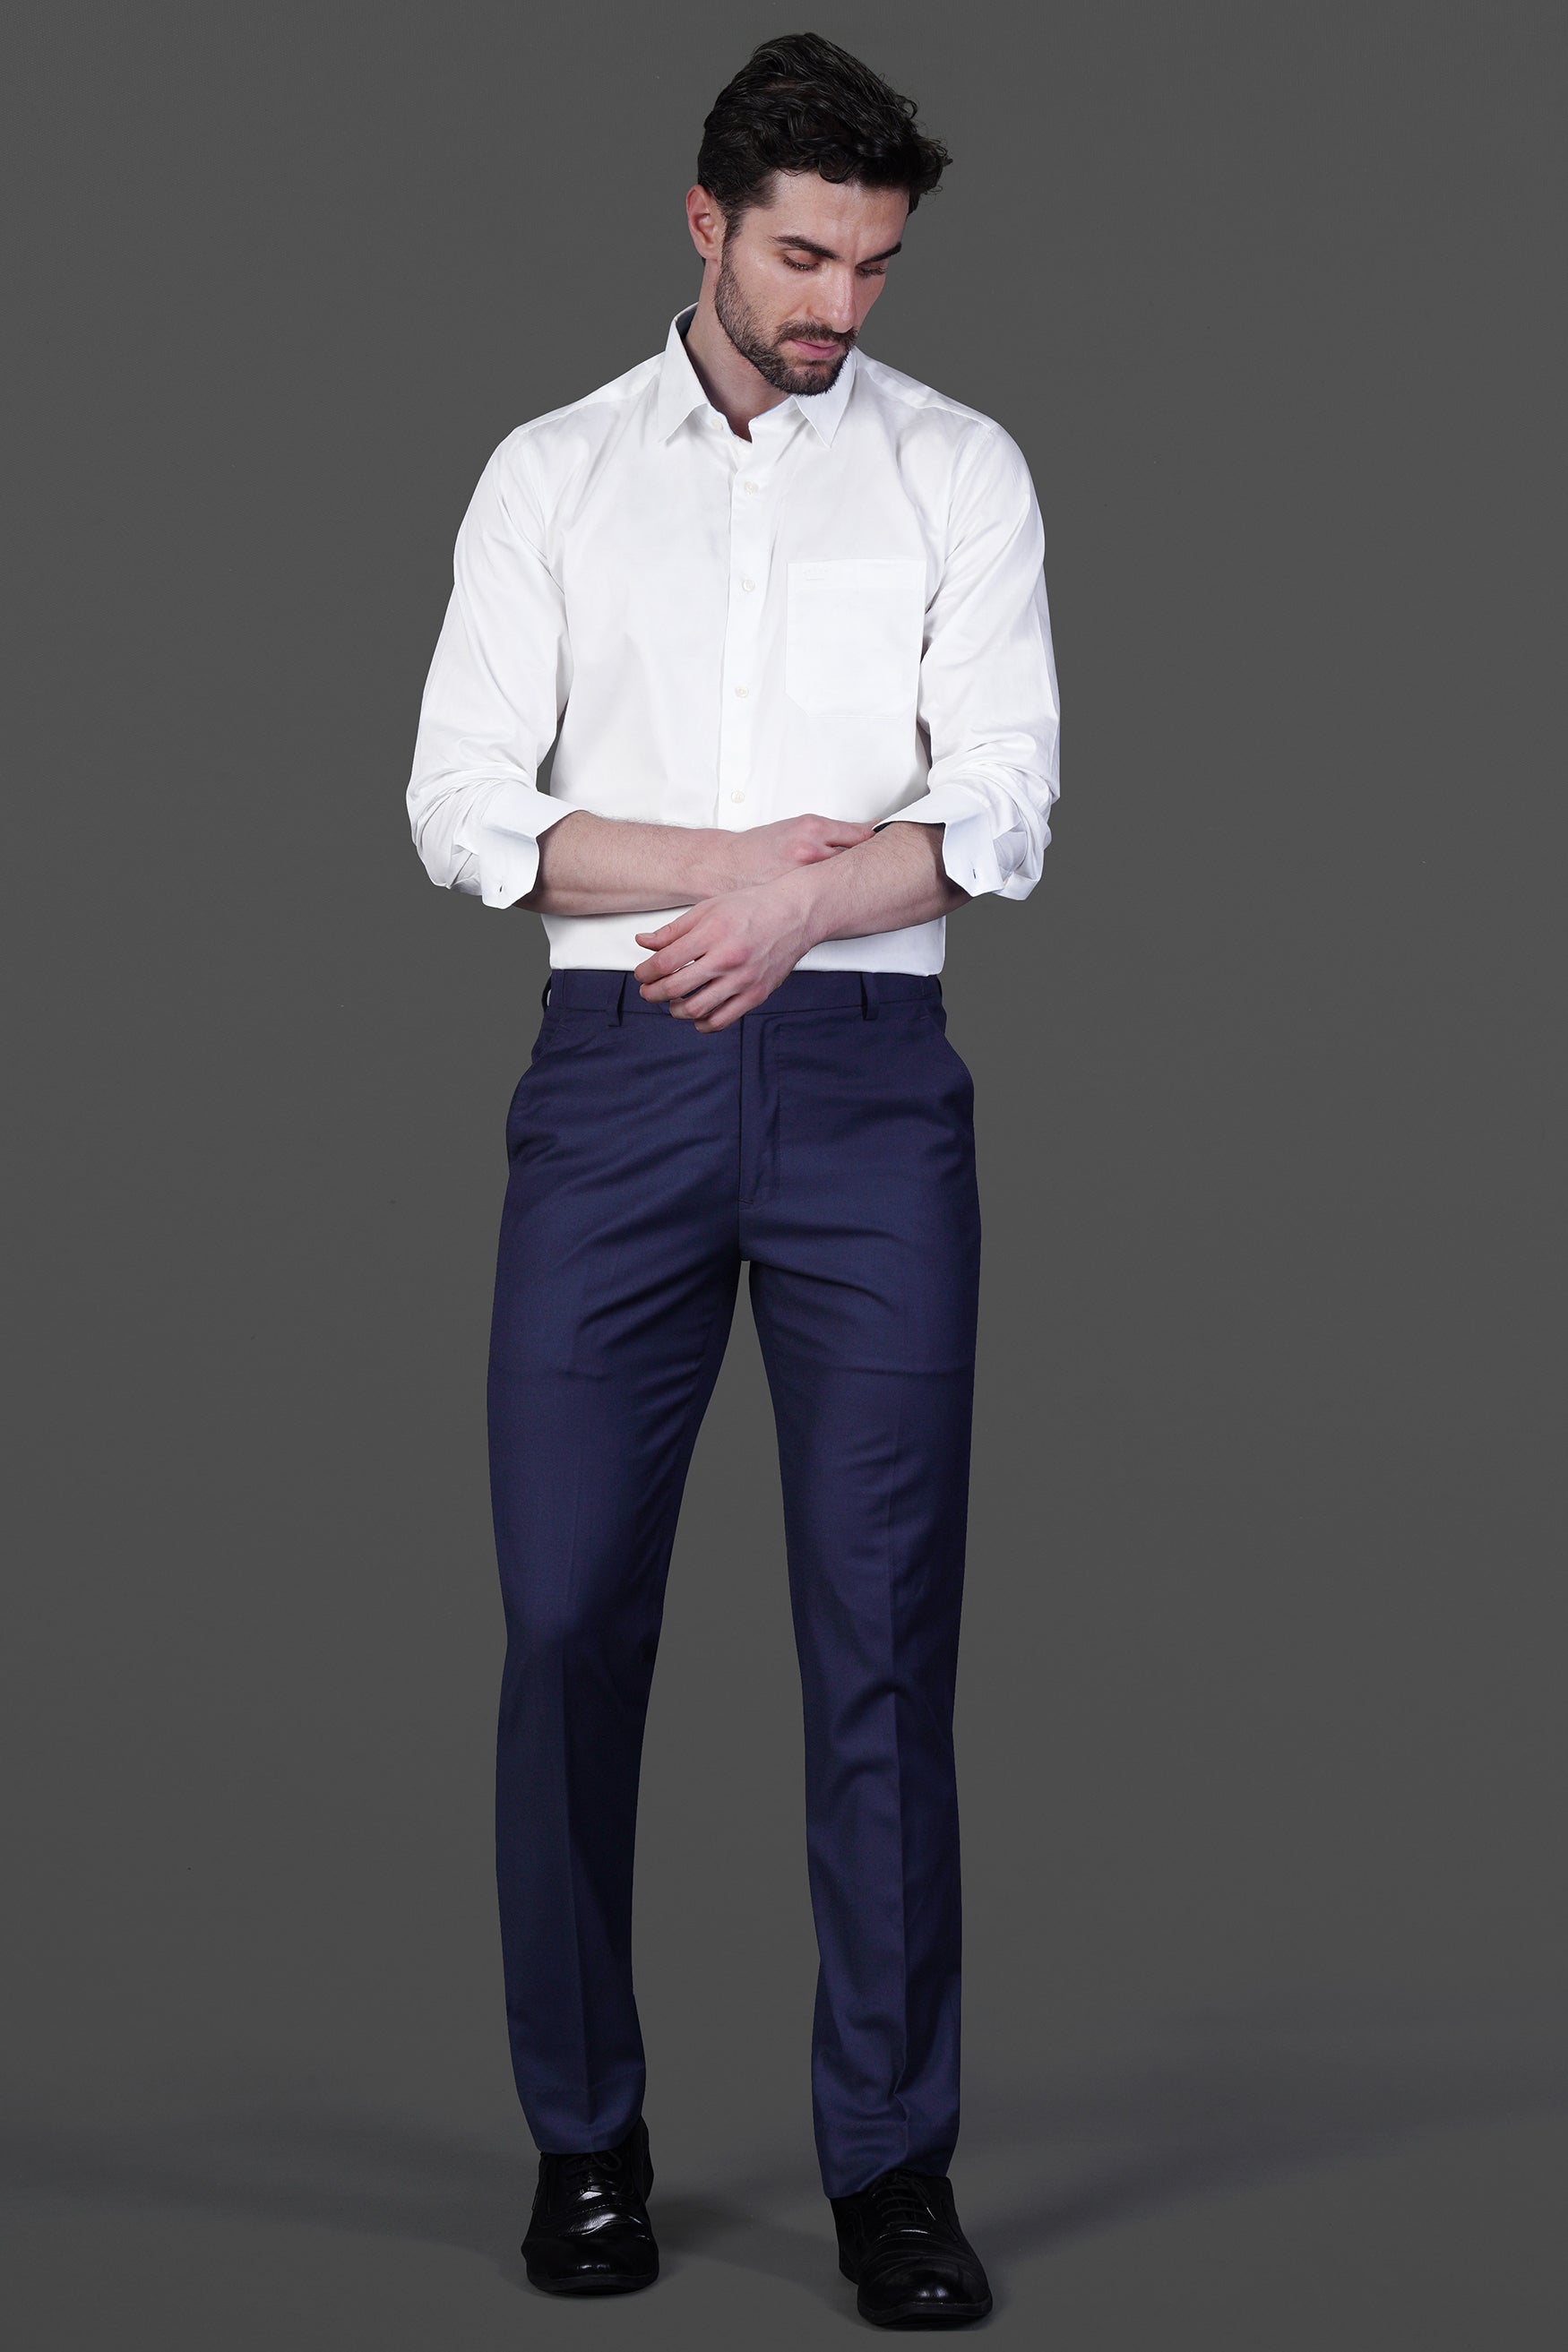 60 Dashing Formal Shirt And Pant Combinations For Men | Shirt and pants  combinations for men, Shirt outfit men, Mens casual outfits summer